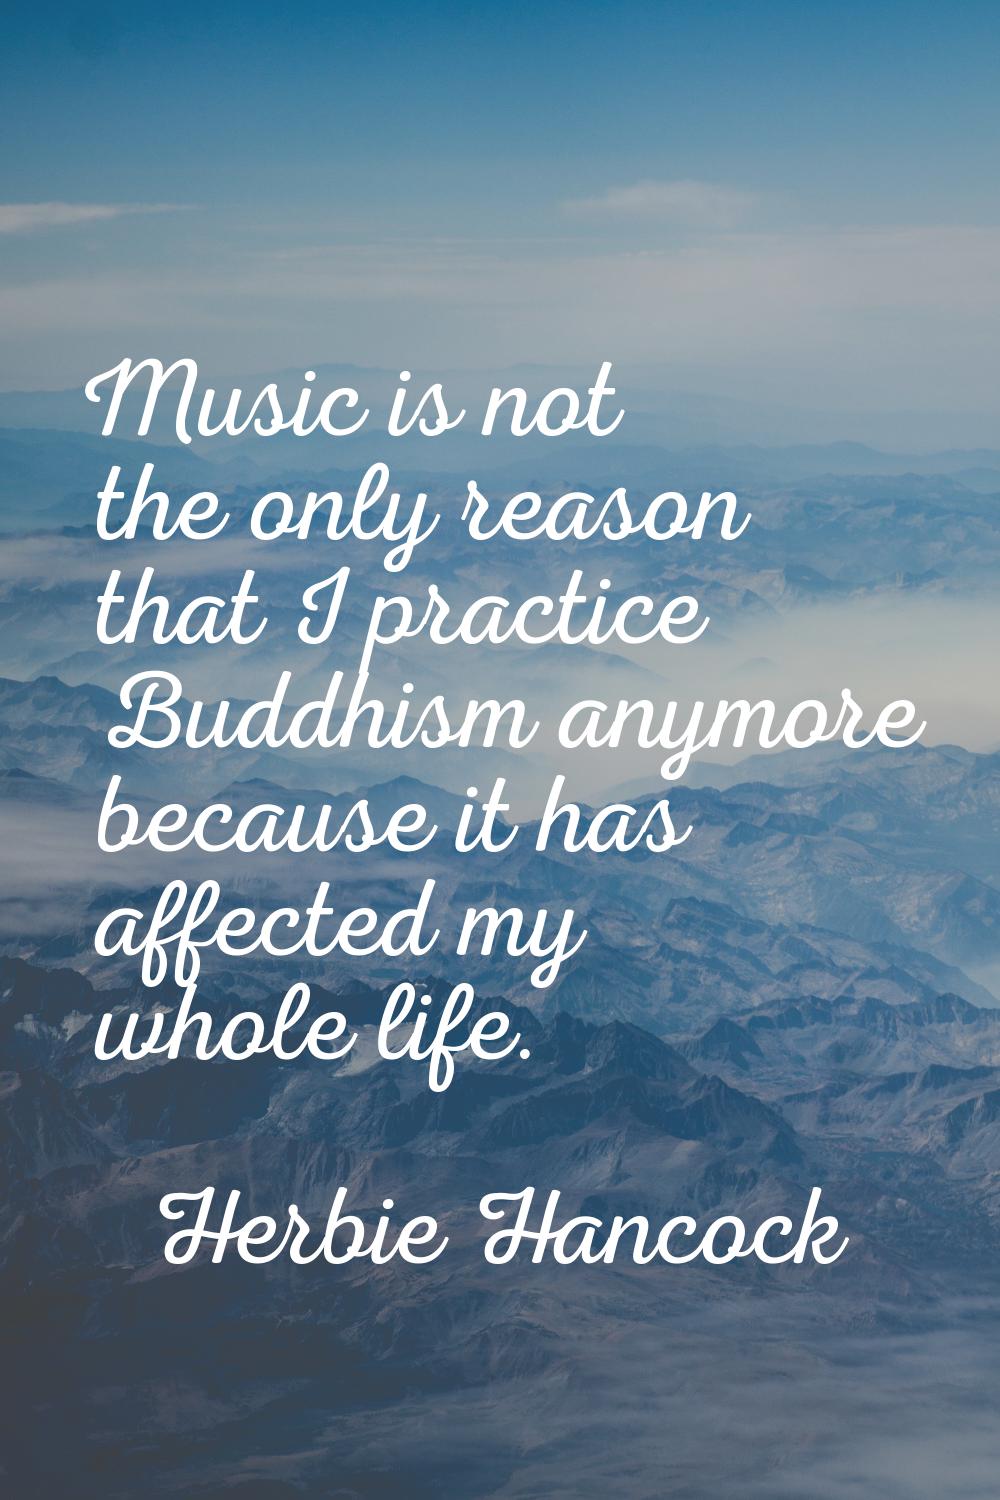 Music is not the only reason that I practice Buddhism anymore because it has affected my whole life